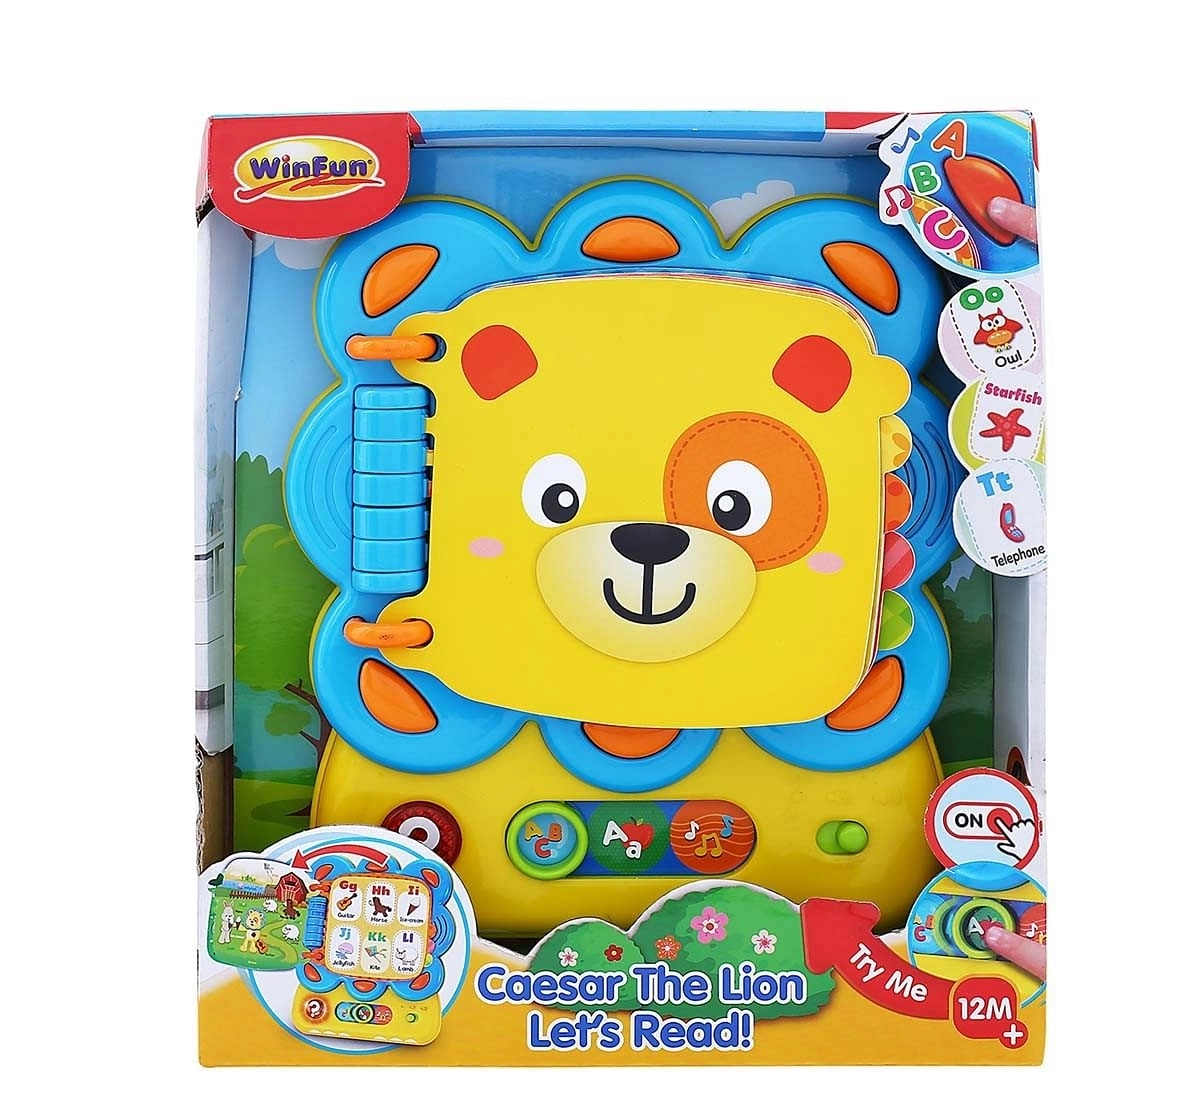 Winfun Caesar the Lion Let’S Read, Multi Color Learning Toys for Kids age 12M+ 